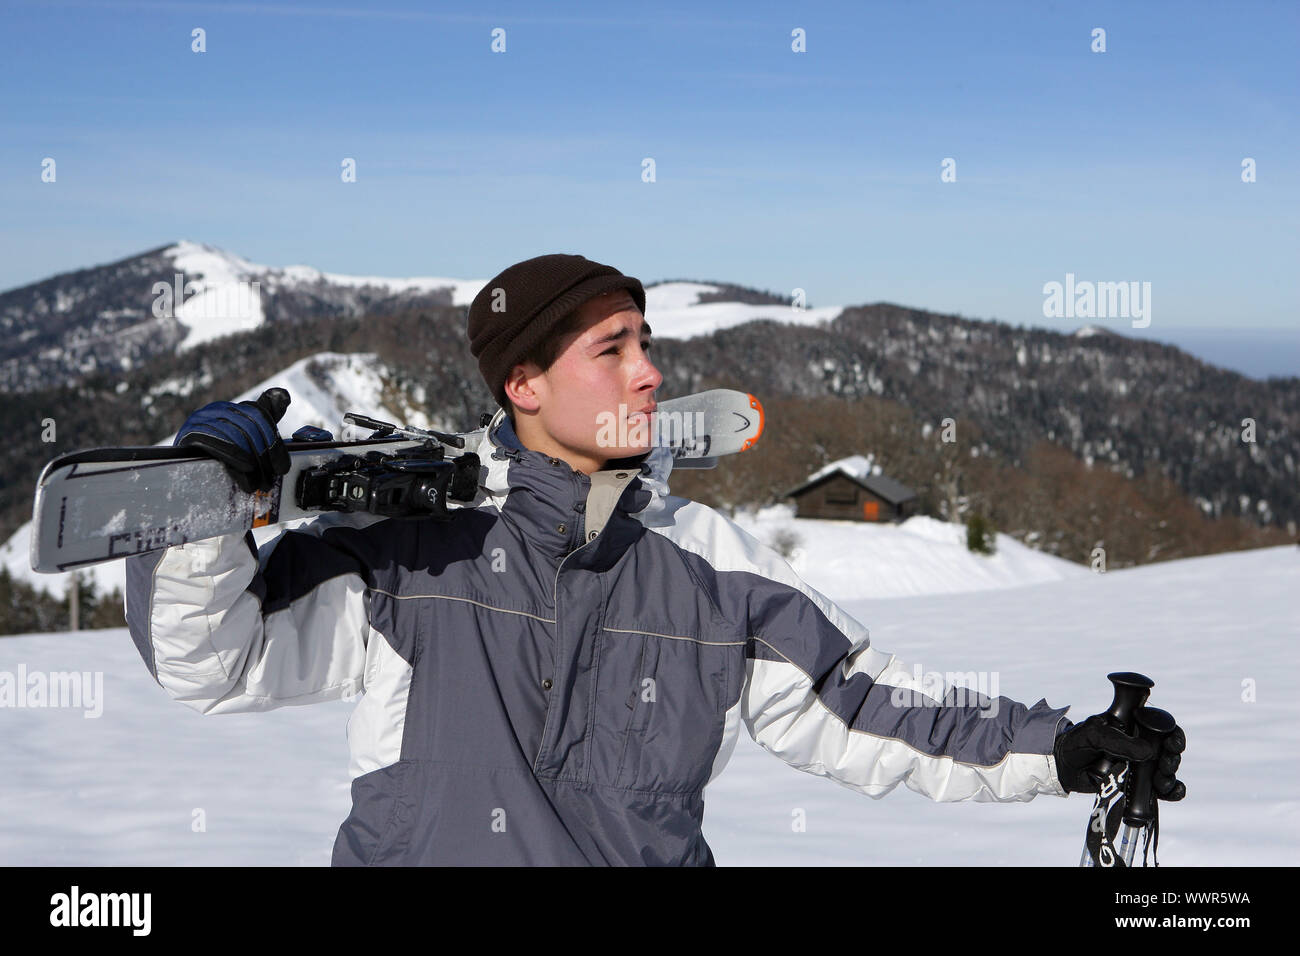 Boy with skis on shoulder Stock Photo